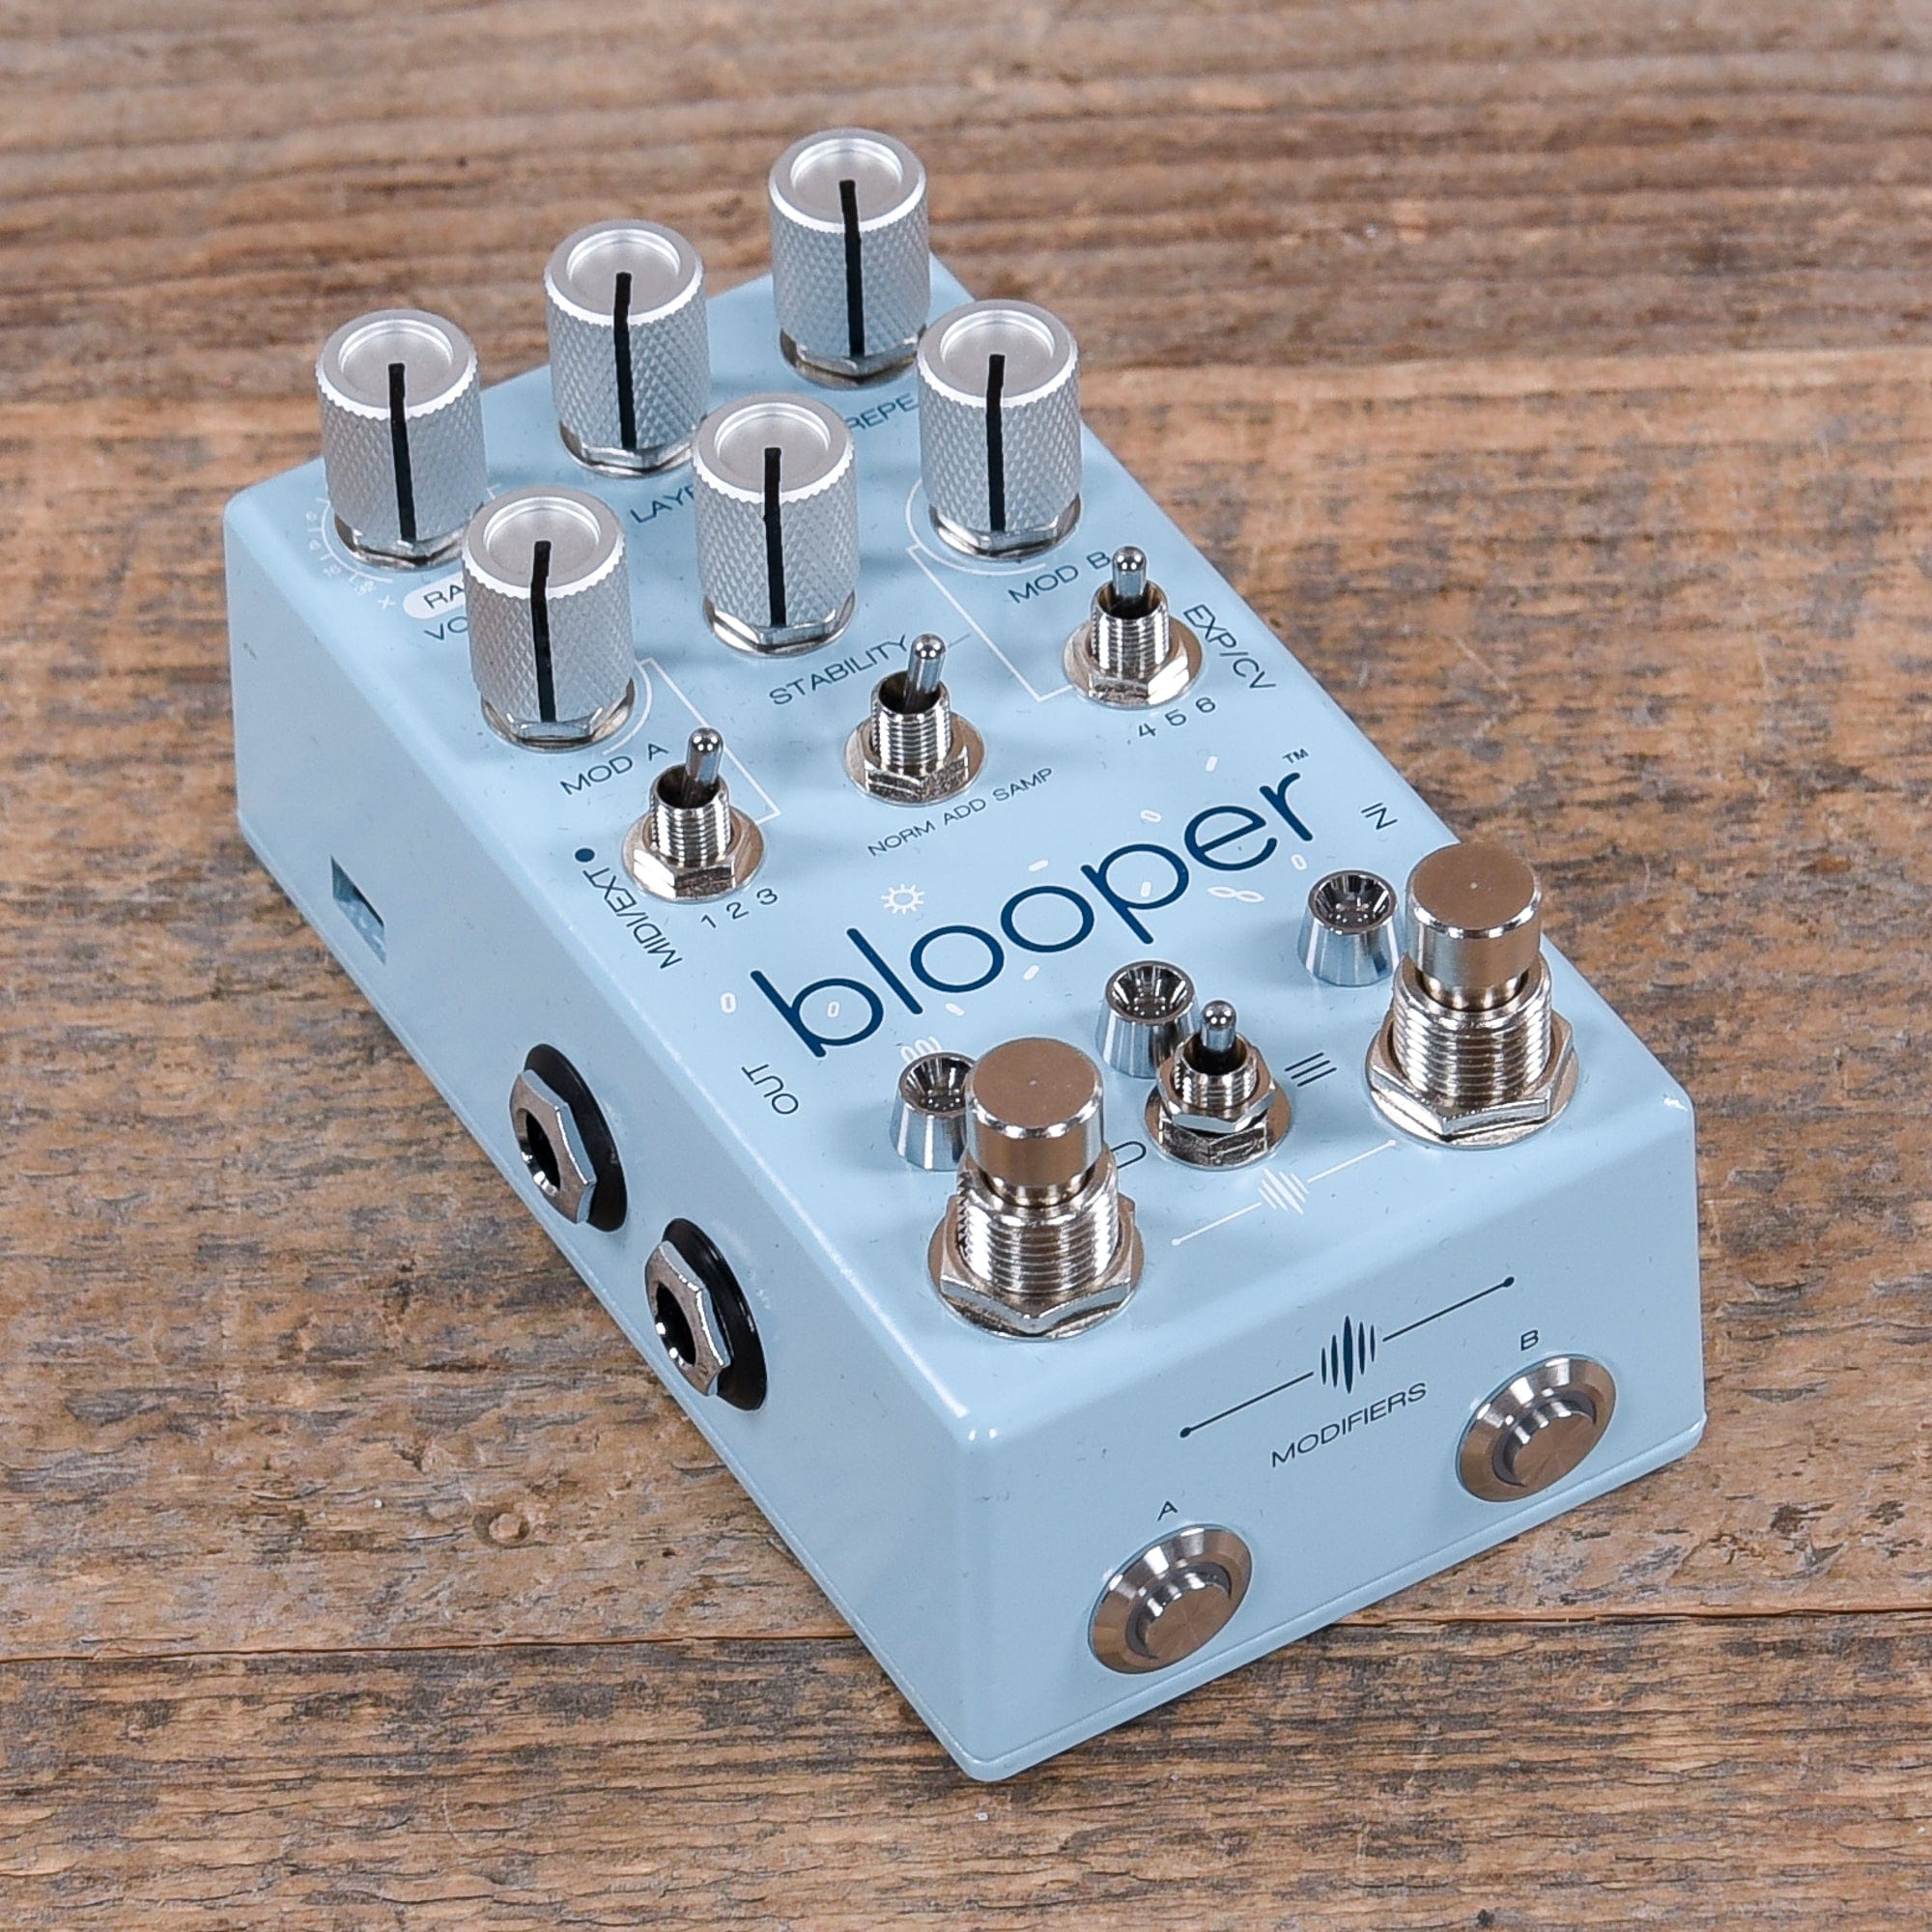 Chase Bliss Blooper Bottomless Looper – Chicago Music Exchange